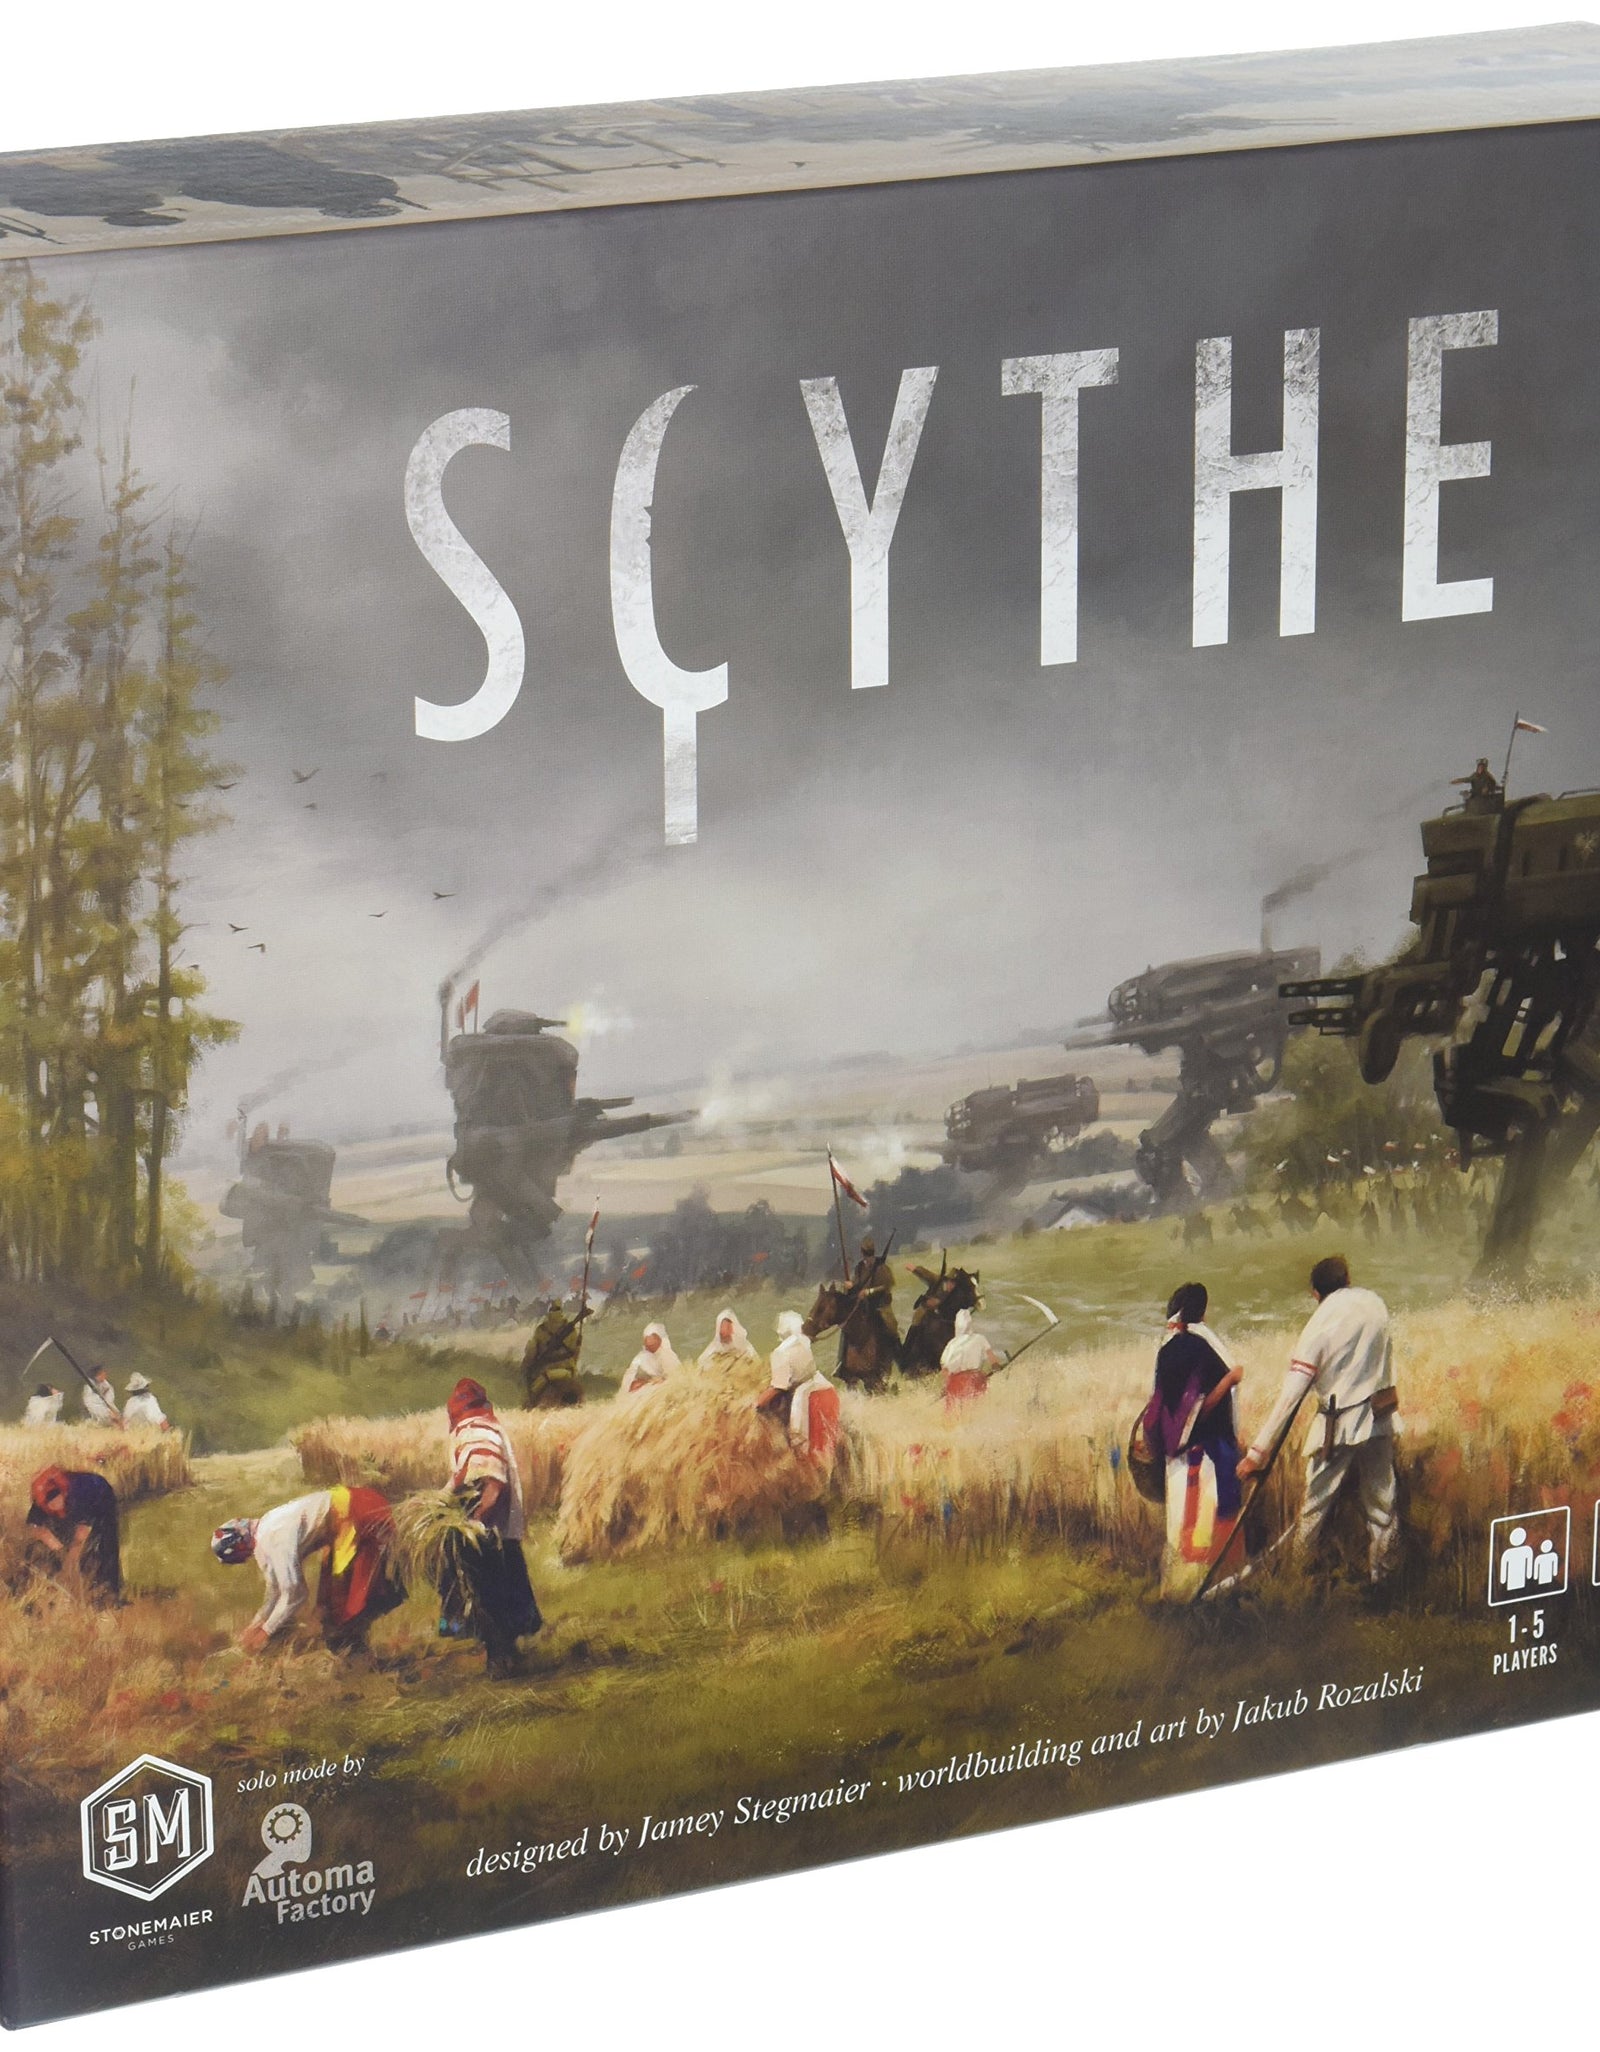 Stonemaier Games Scythe Board Game - An Engine-Building, Area Control for 1-5 Players, Ages 14+, Gray